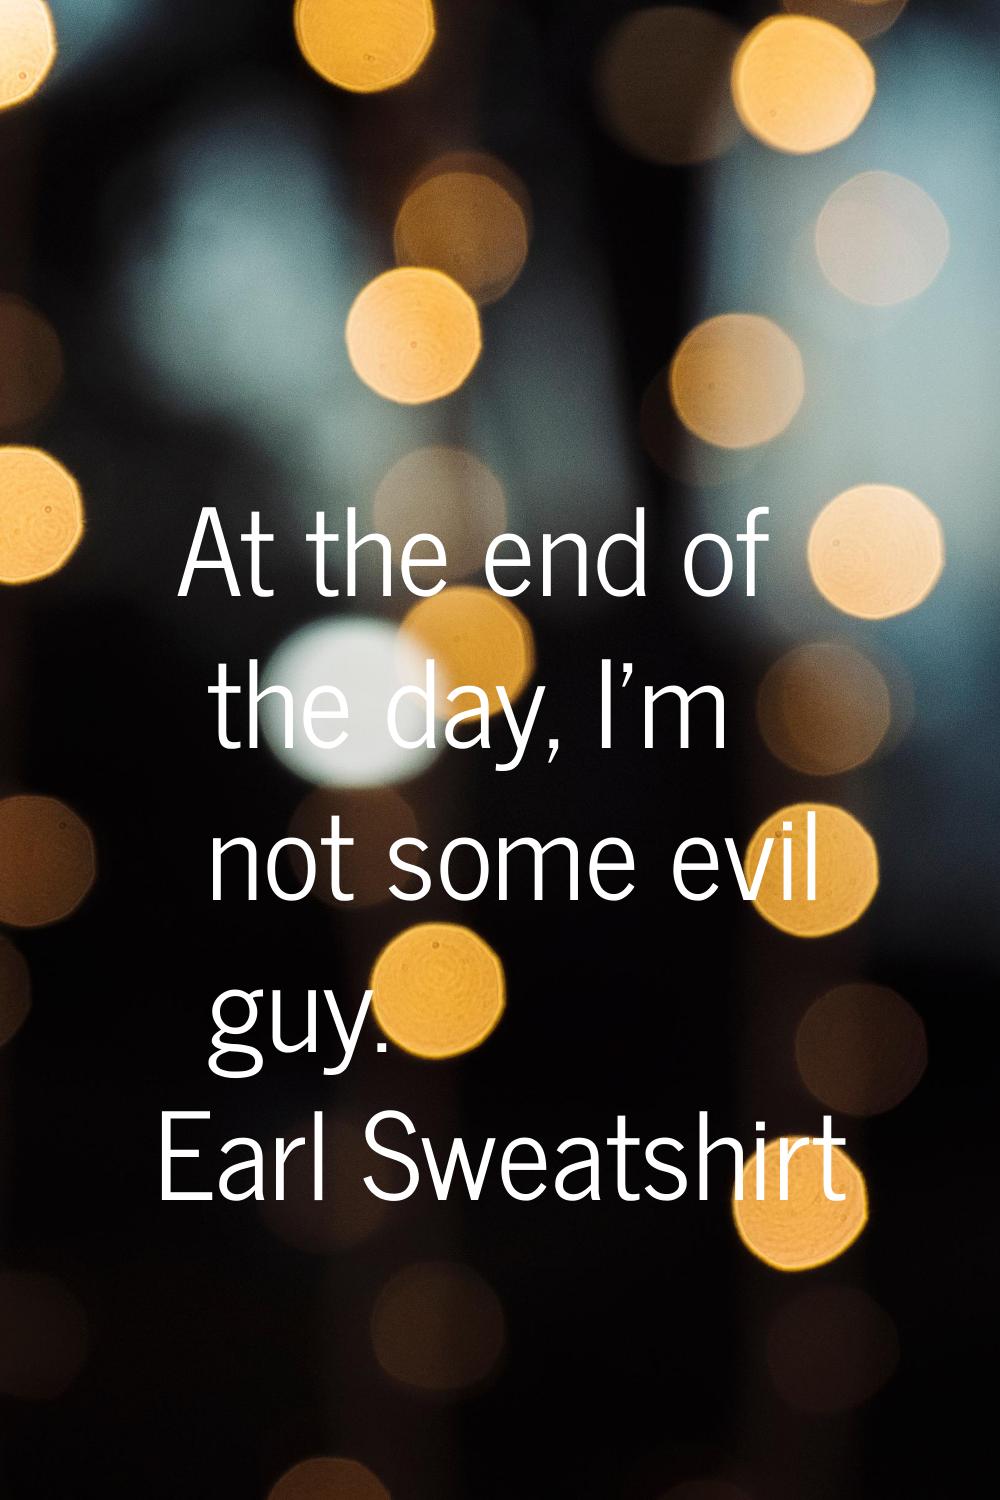 At the end of the day, I'm not some evil guy.